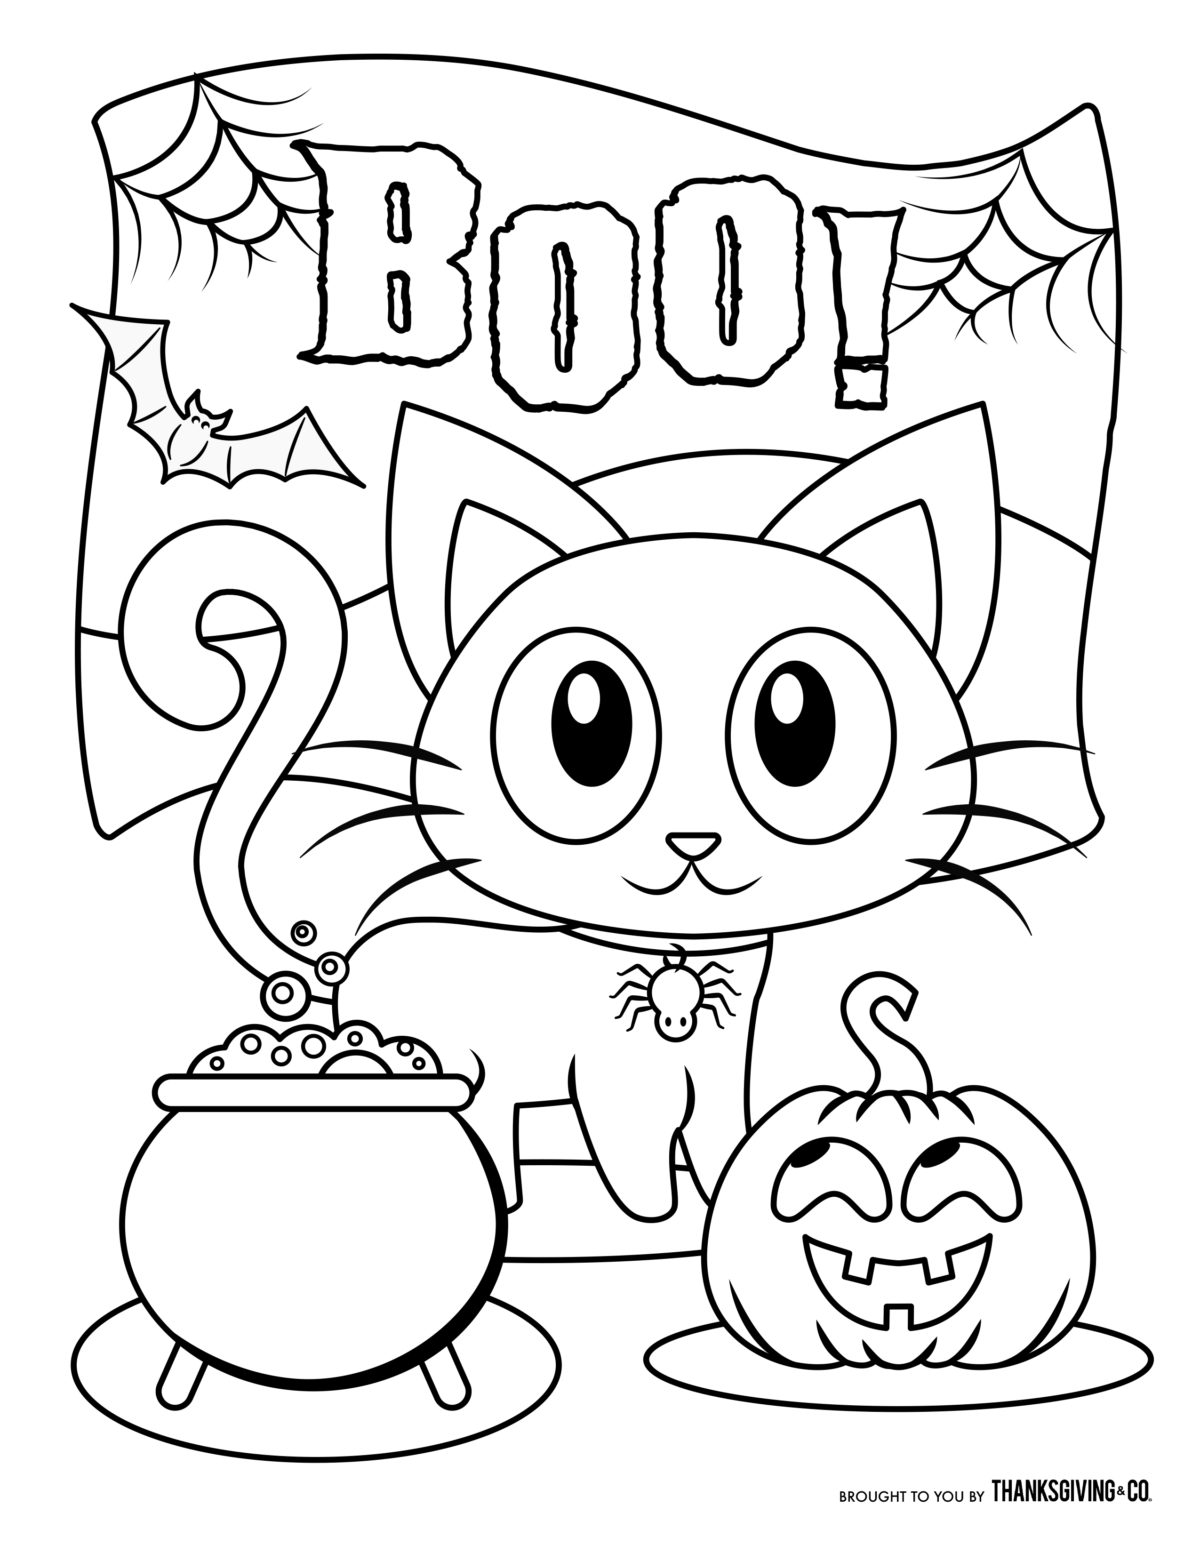 Download Spooky Halloween Coloring Pages (Updated 2020): Printable PDF